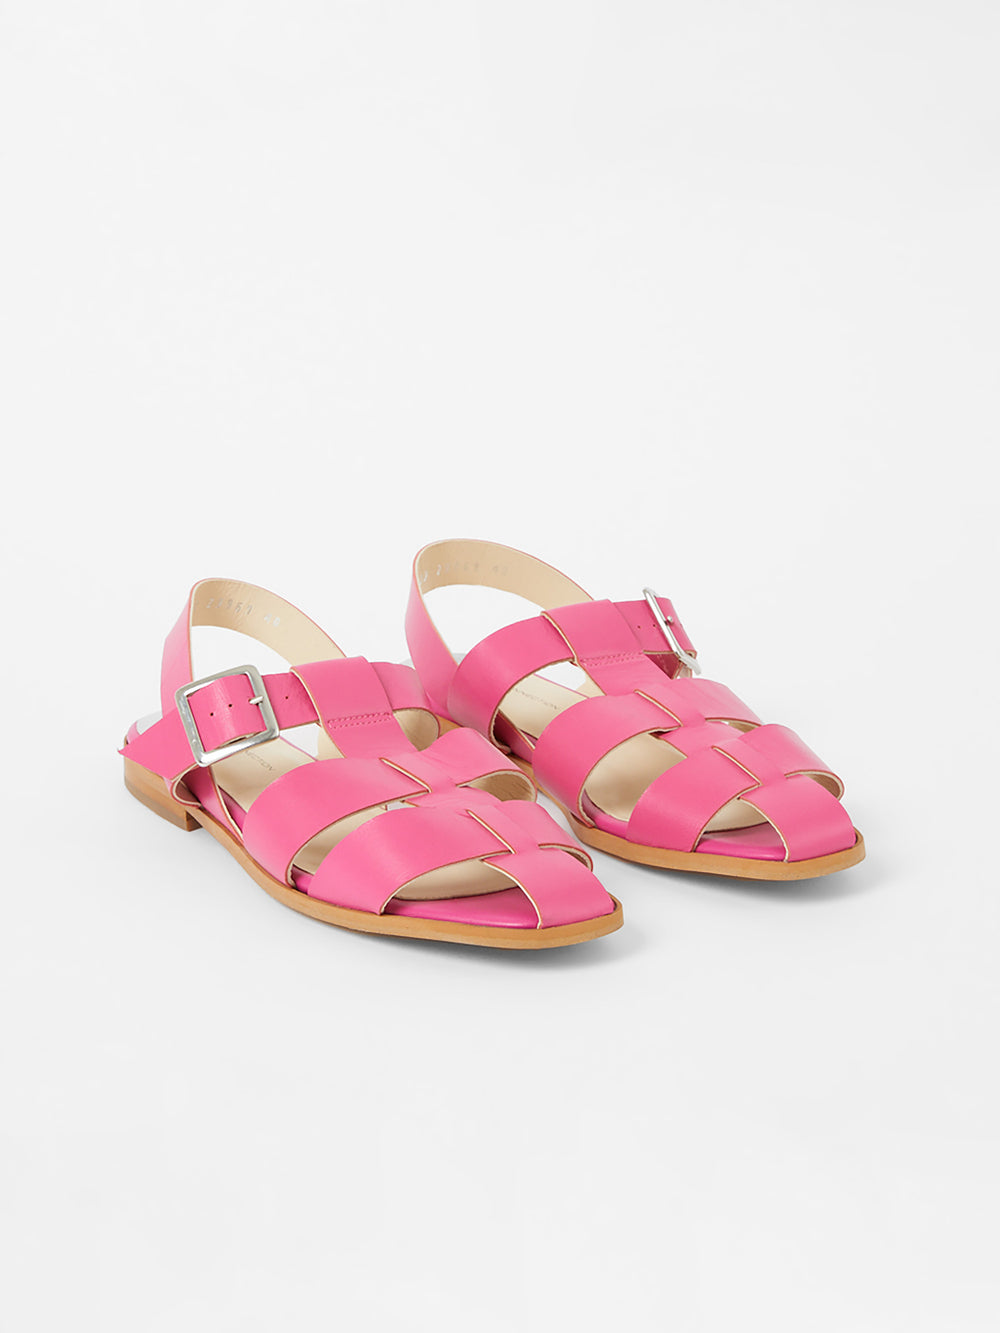 S+W x Luisa Fisherman Caged Sandals Fuschia | French Connection UK